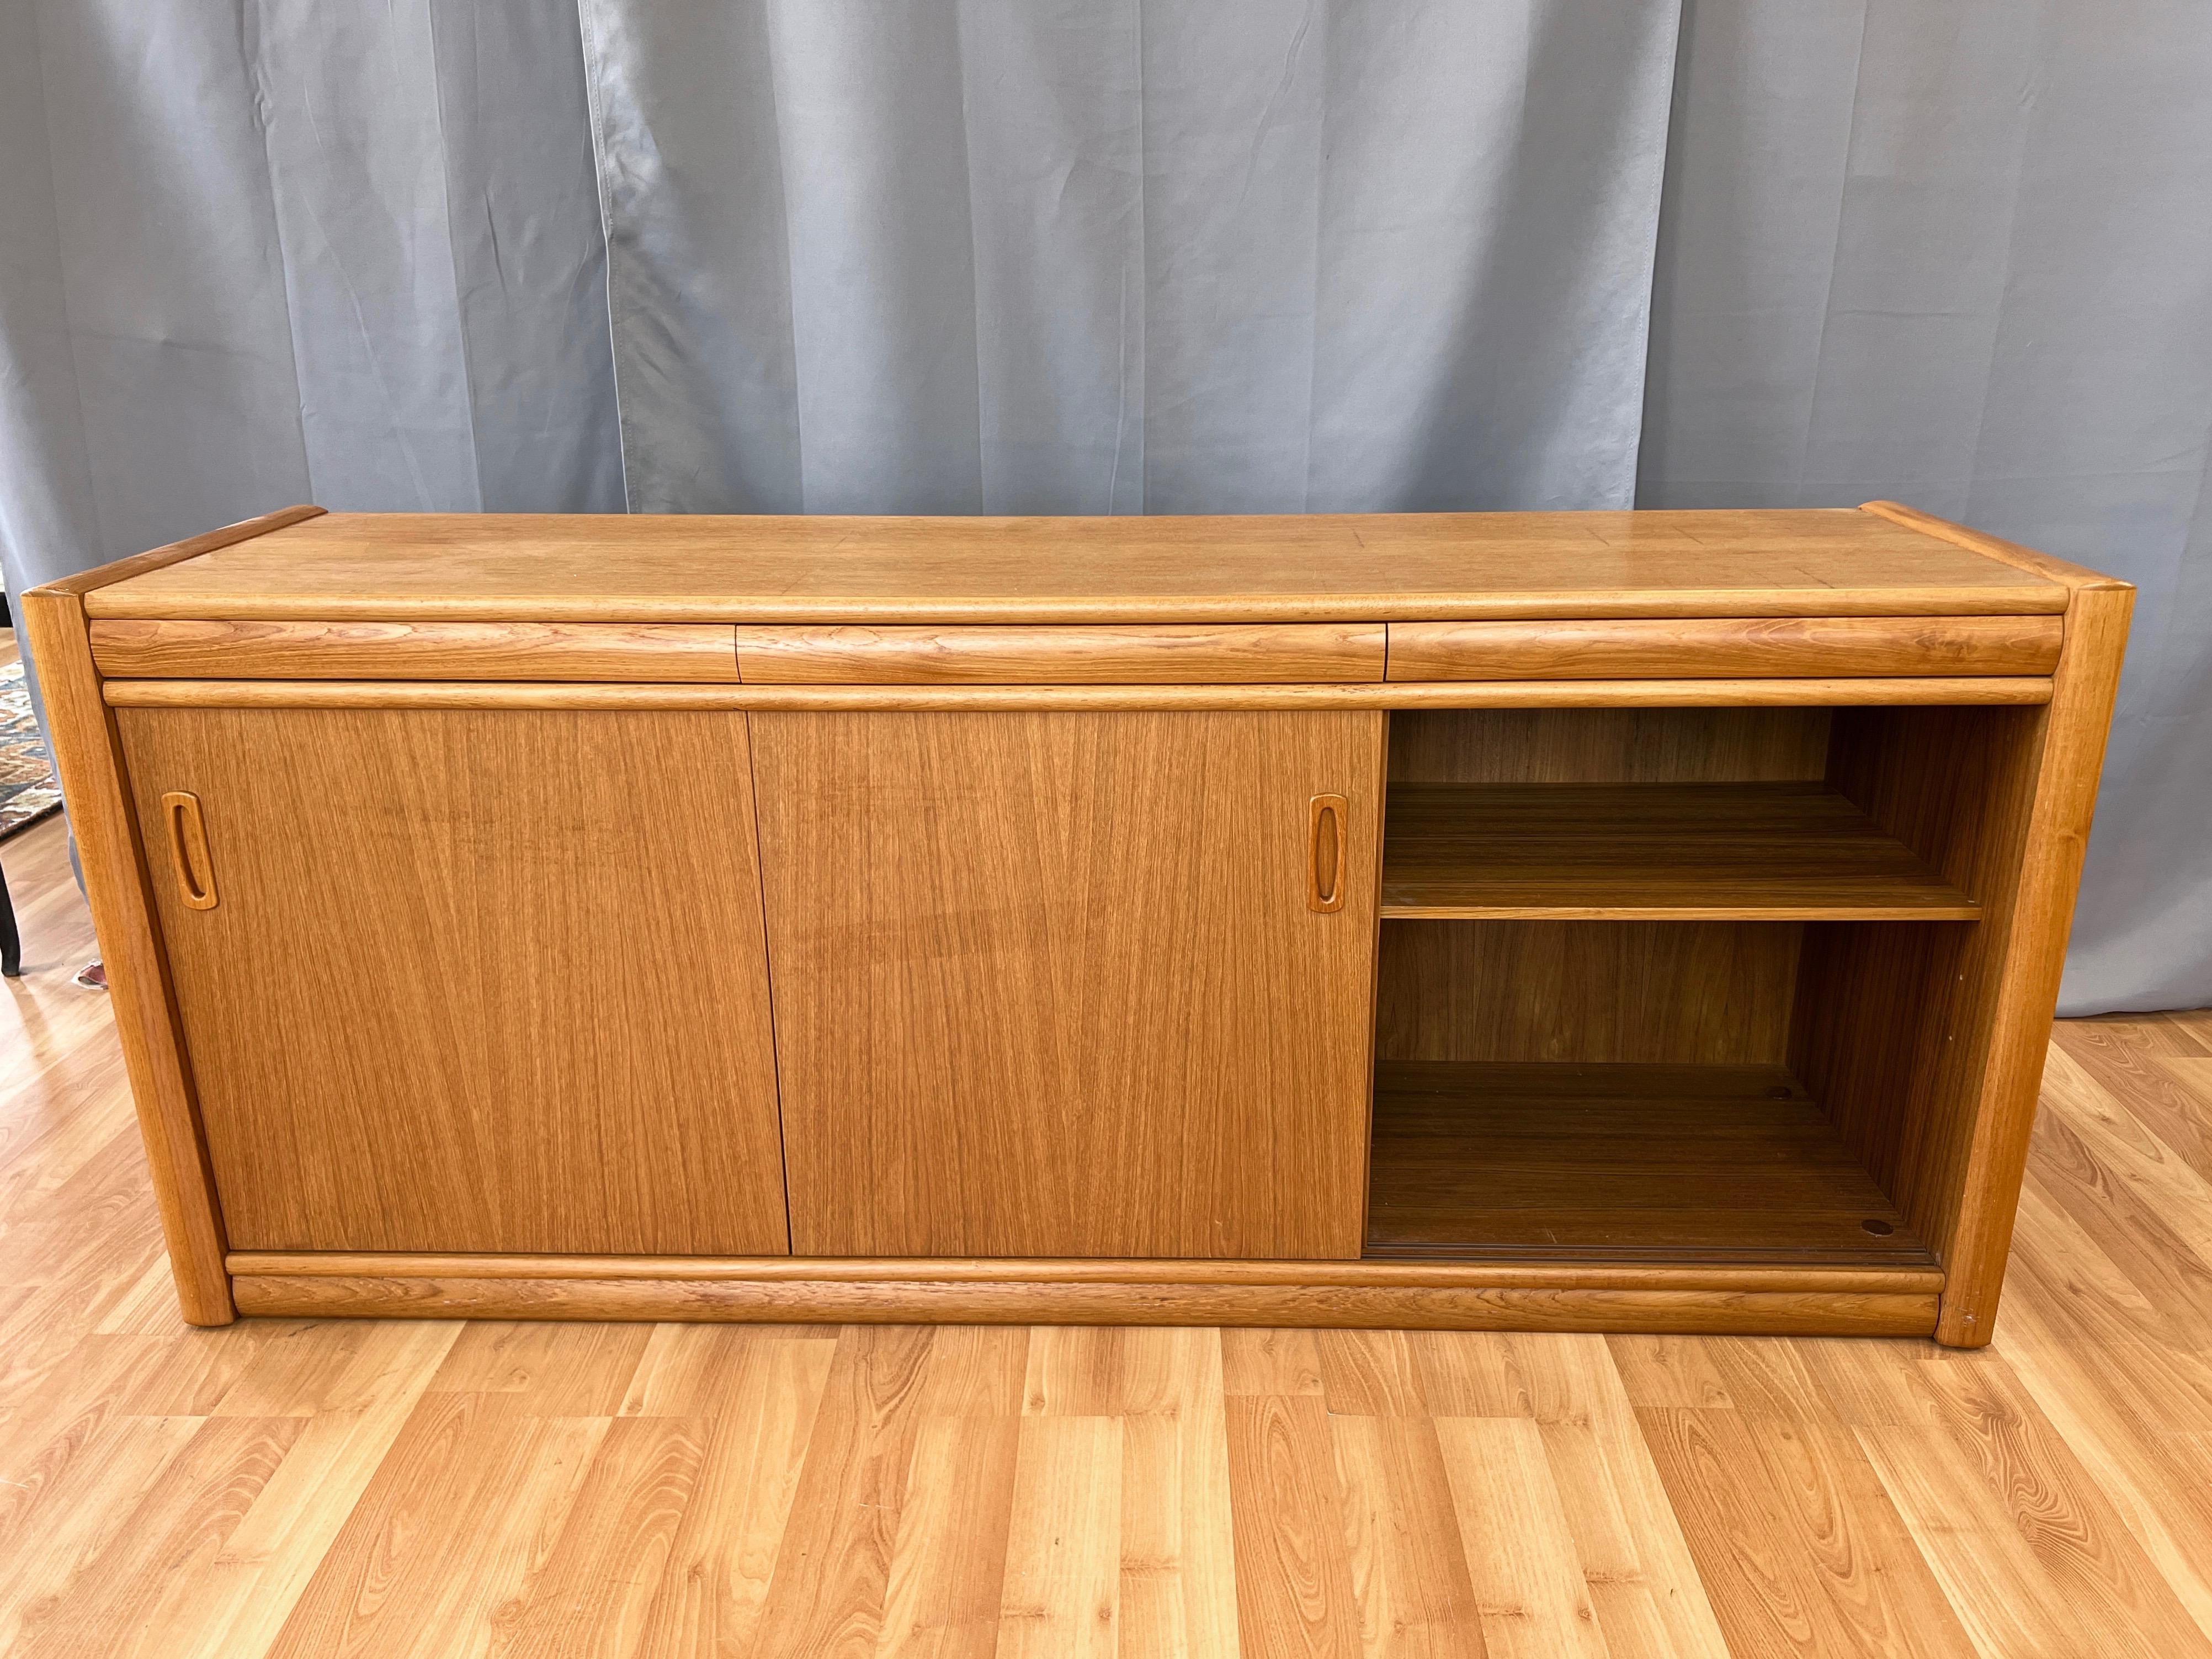 Danish Modern Long Teak Sideboard with Three Doors and Three Drawers, 1970s For Sale 1